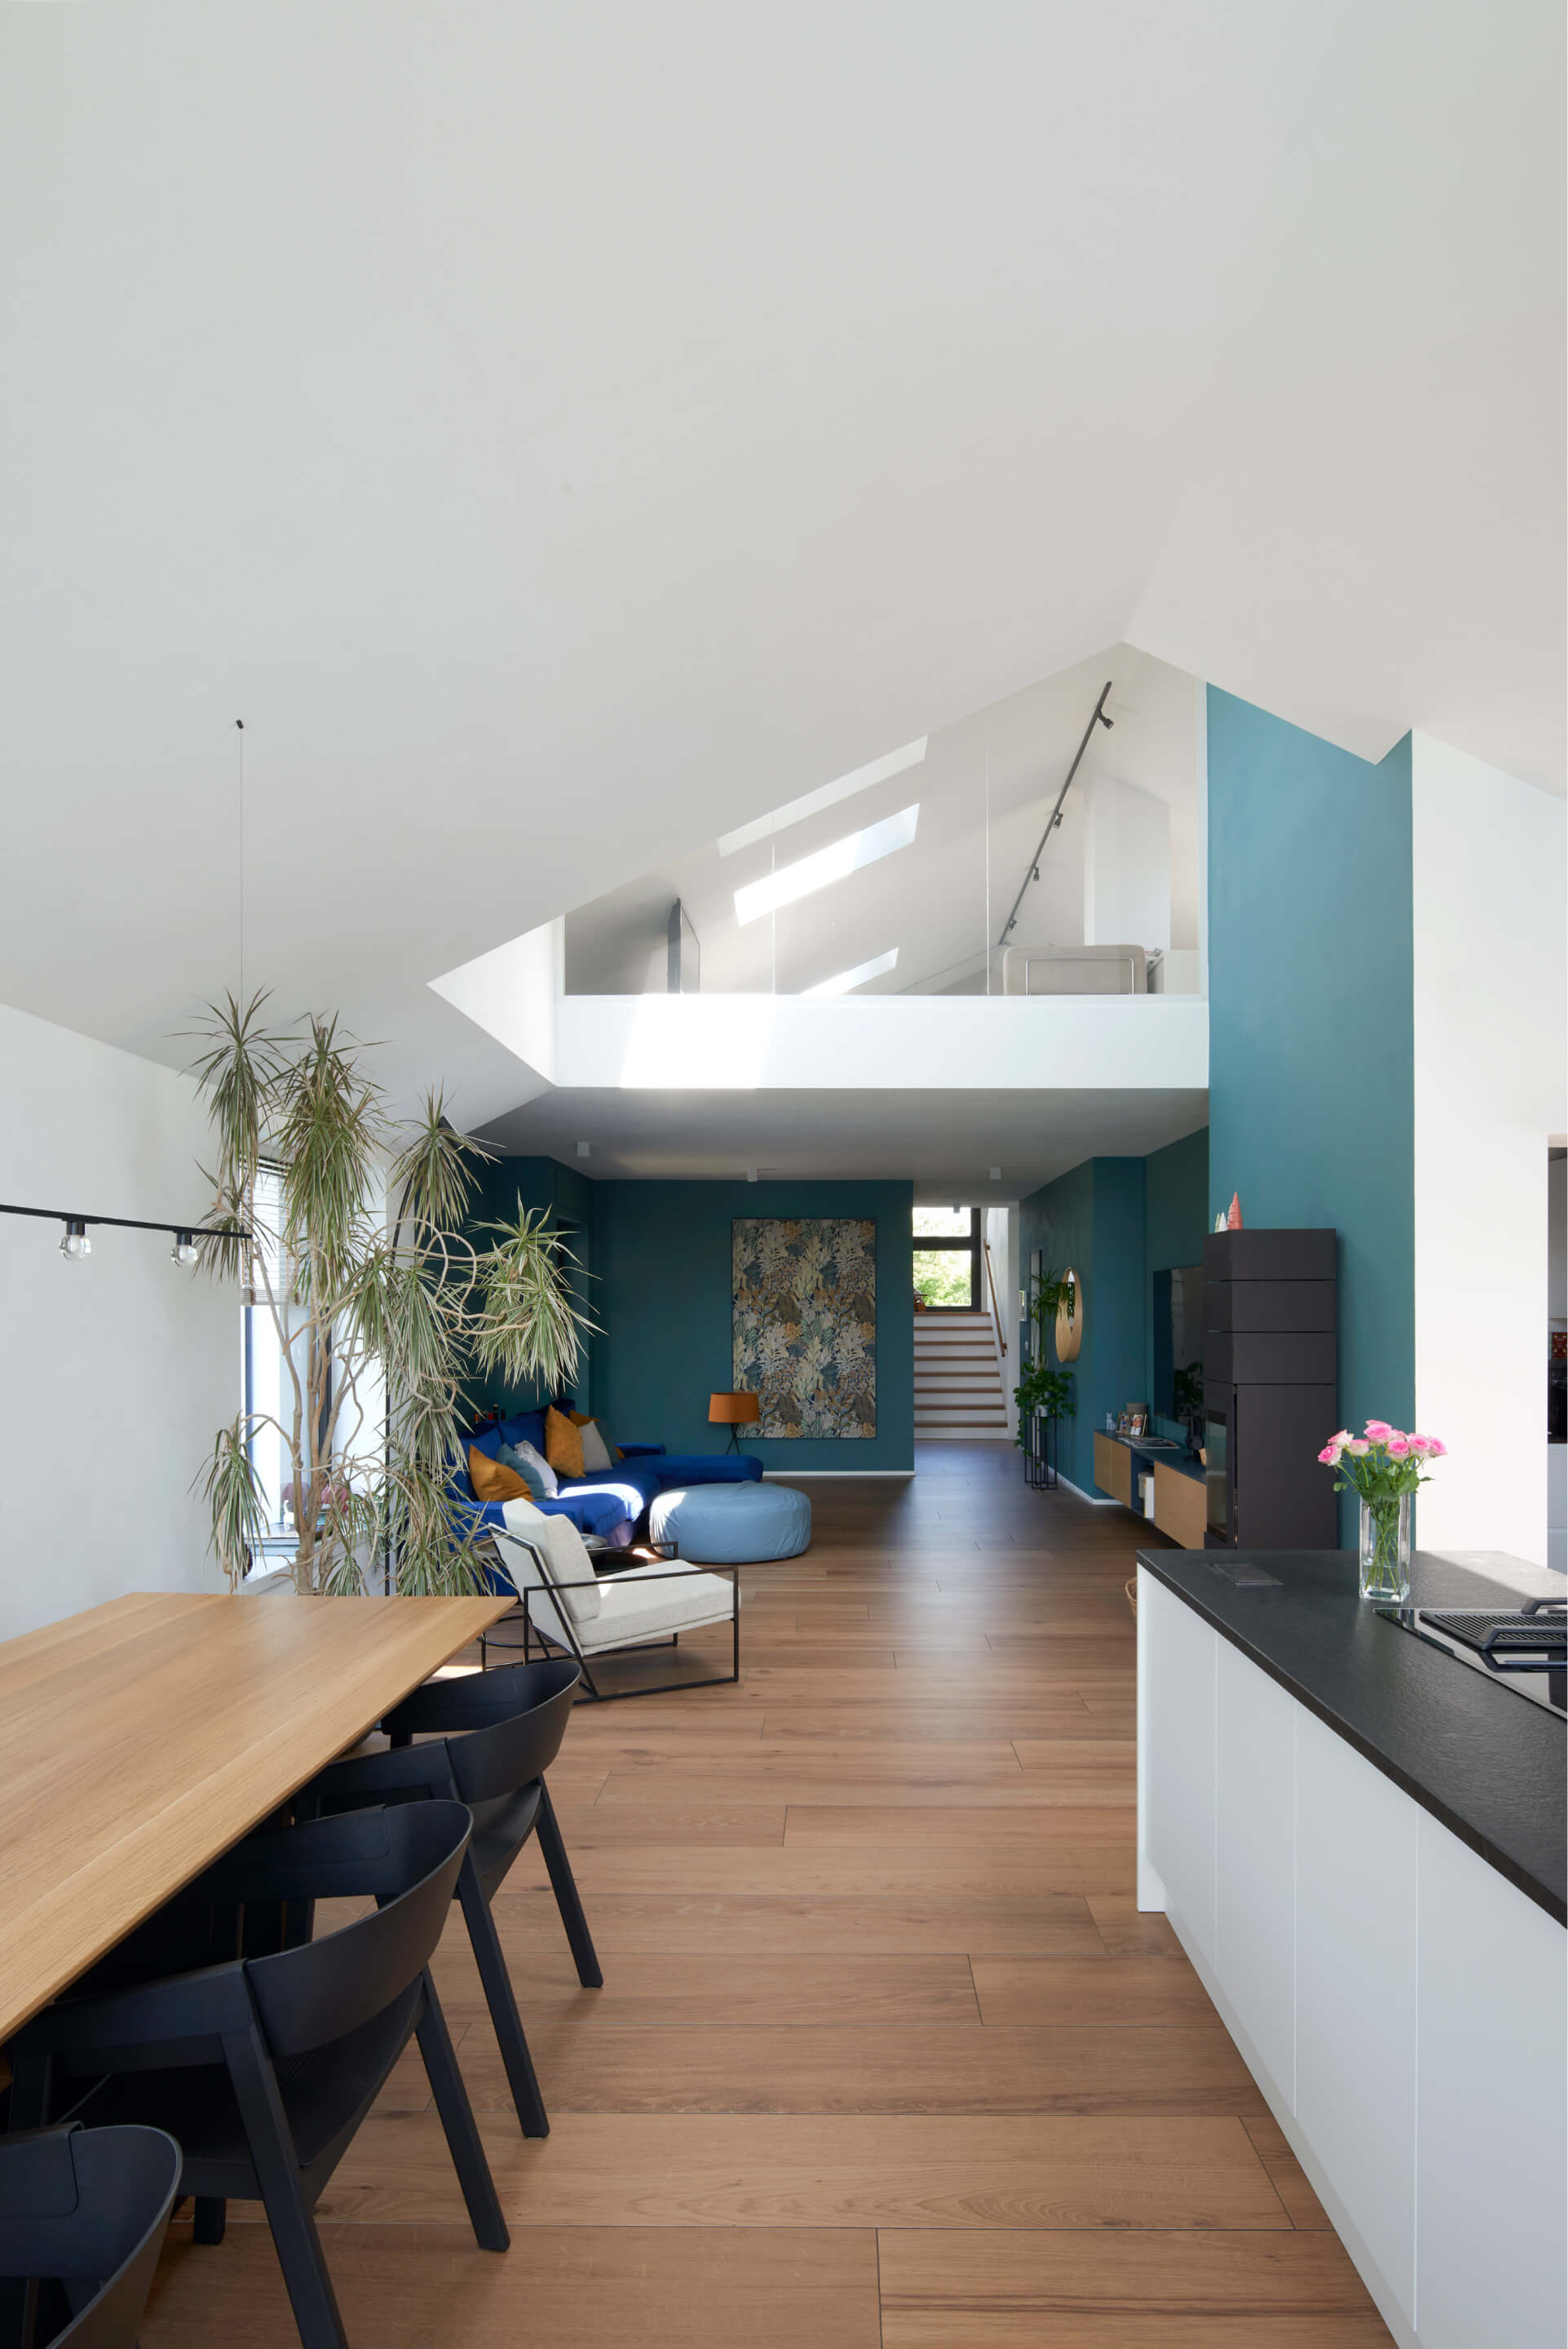 Bright kitchen and living room detail with roof windows in the attic